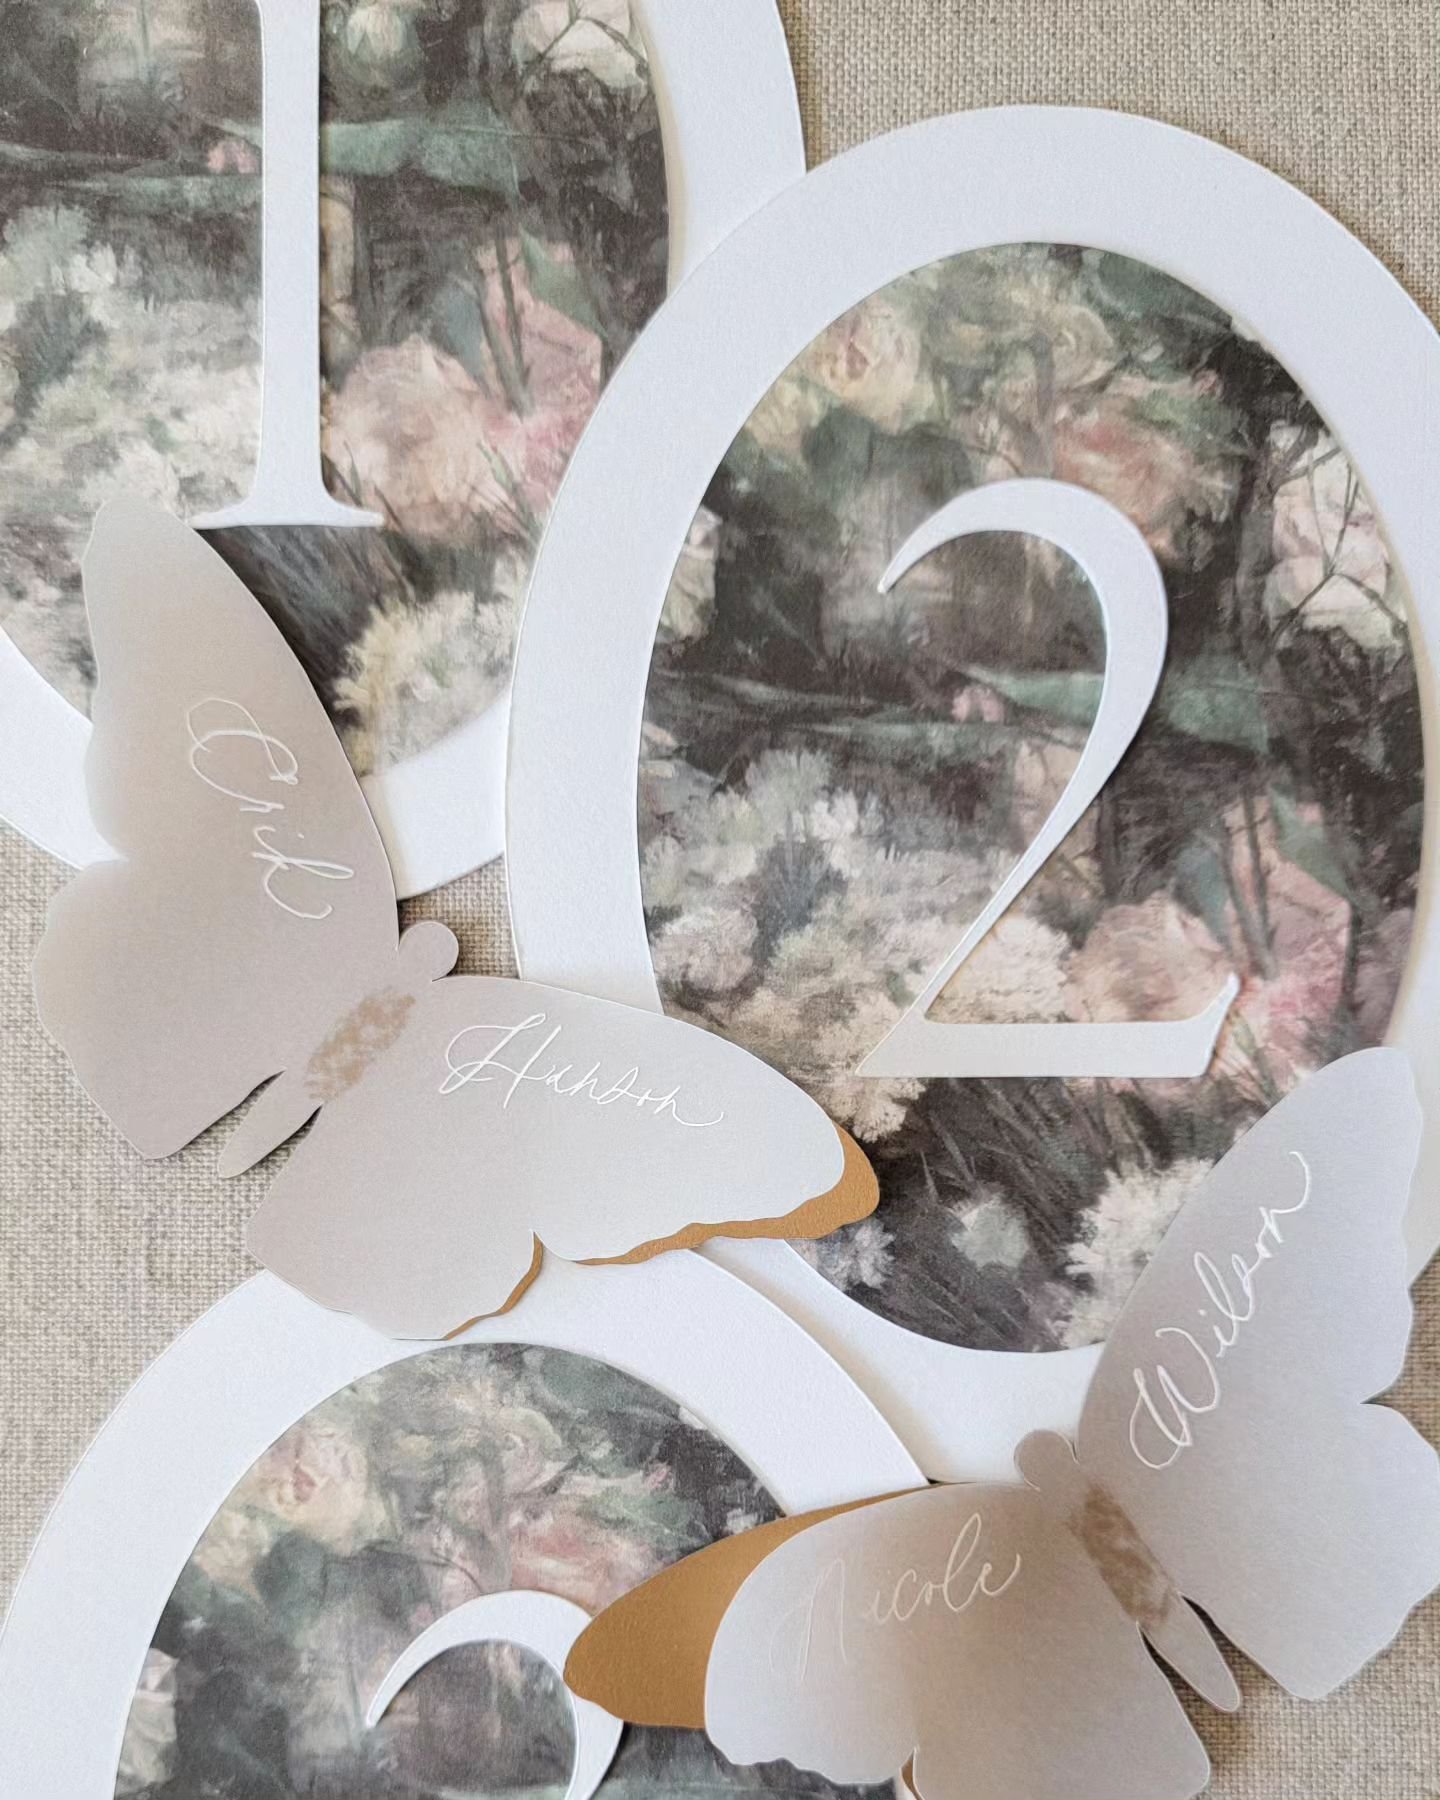 Table numbers of my dreams, paired with vellum + gold butterfly escort cards for N&amp;E's private estate wedding last summer ✨️
_____

#krisannaelizabethdesign #littlethingstheory #tablenumbers #escortcards